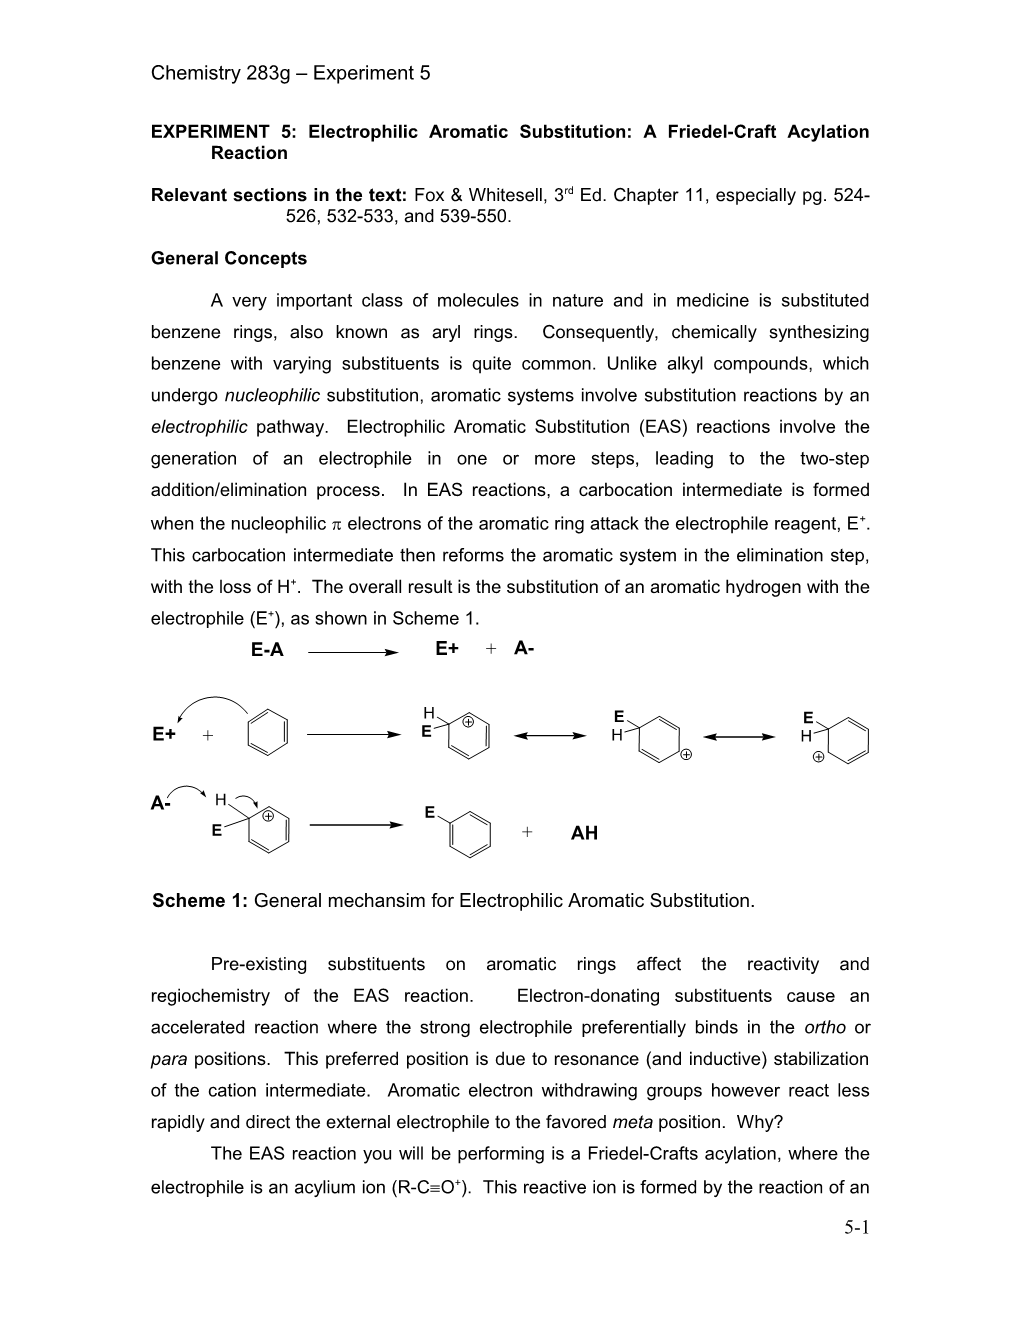 EXPERIMENT 4: Electrophilic Aromatic Substitution: a Friedel-Craft Acylation Reaction